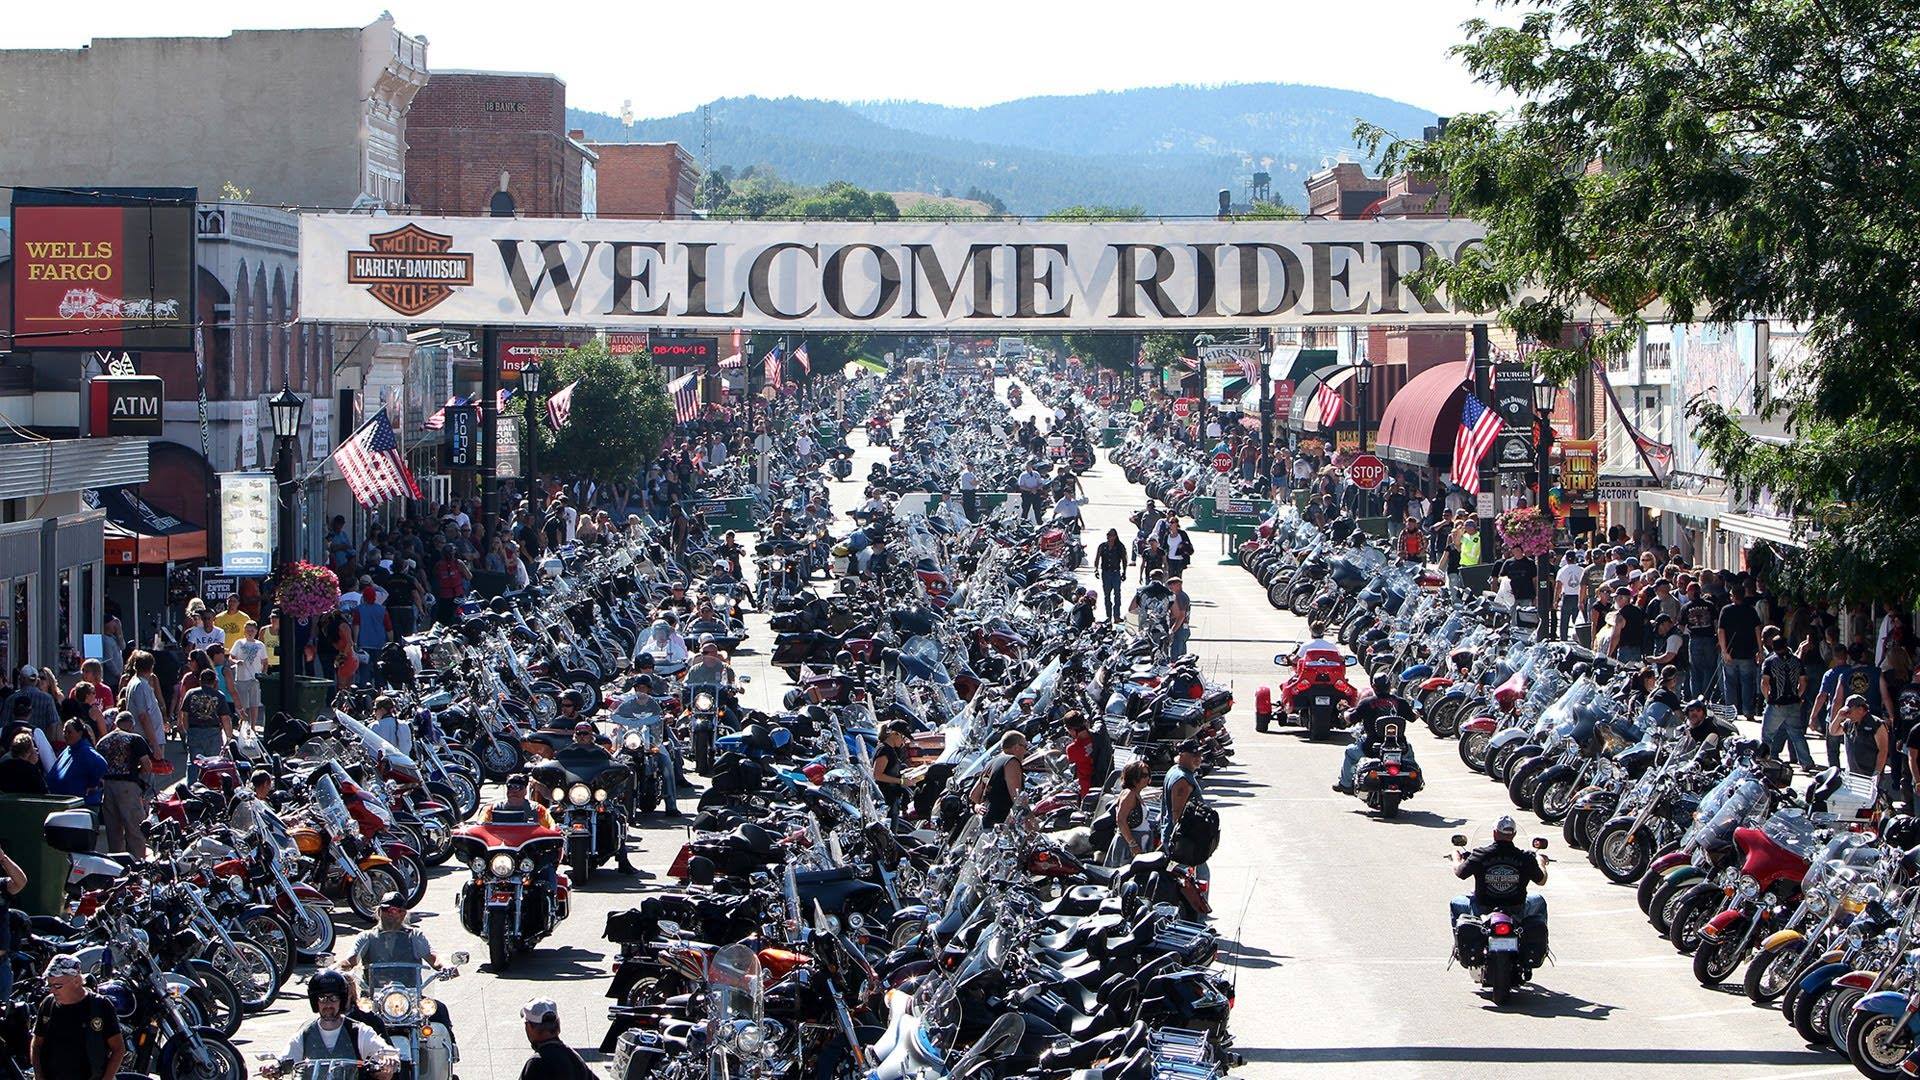 It all started August 14, 1938, in Sturgis